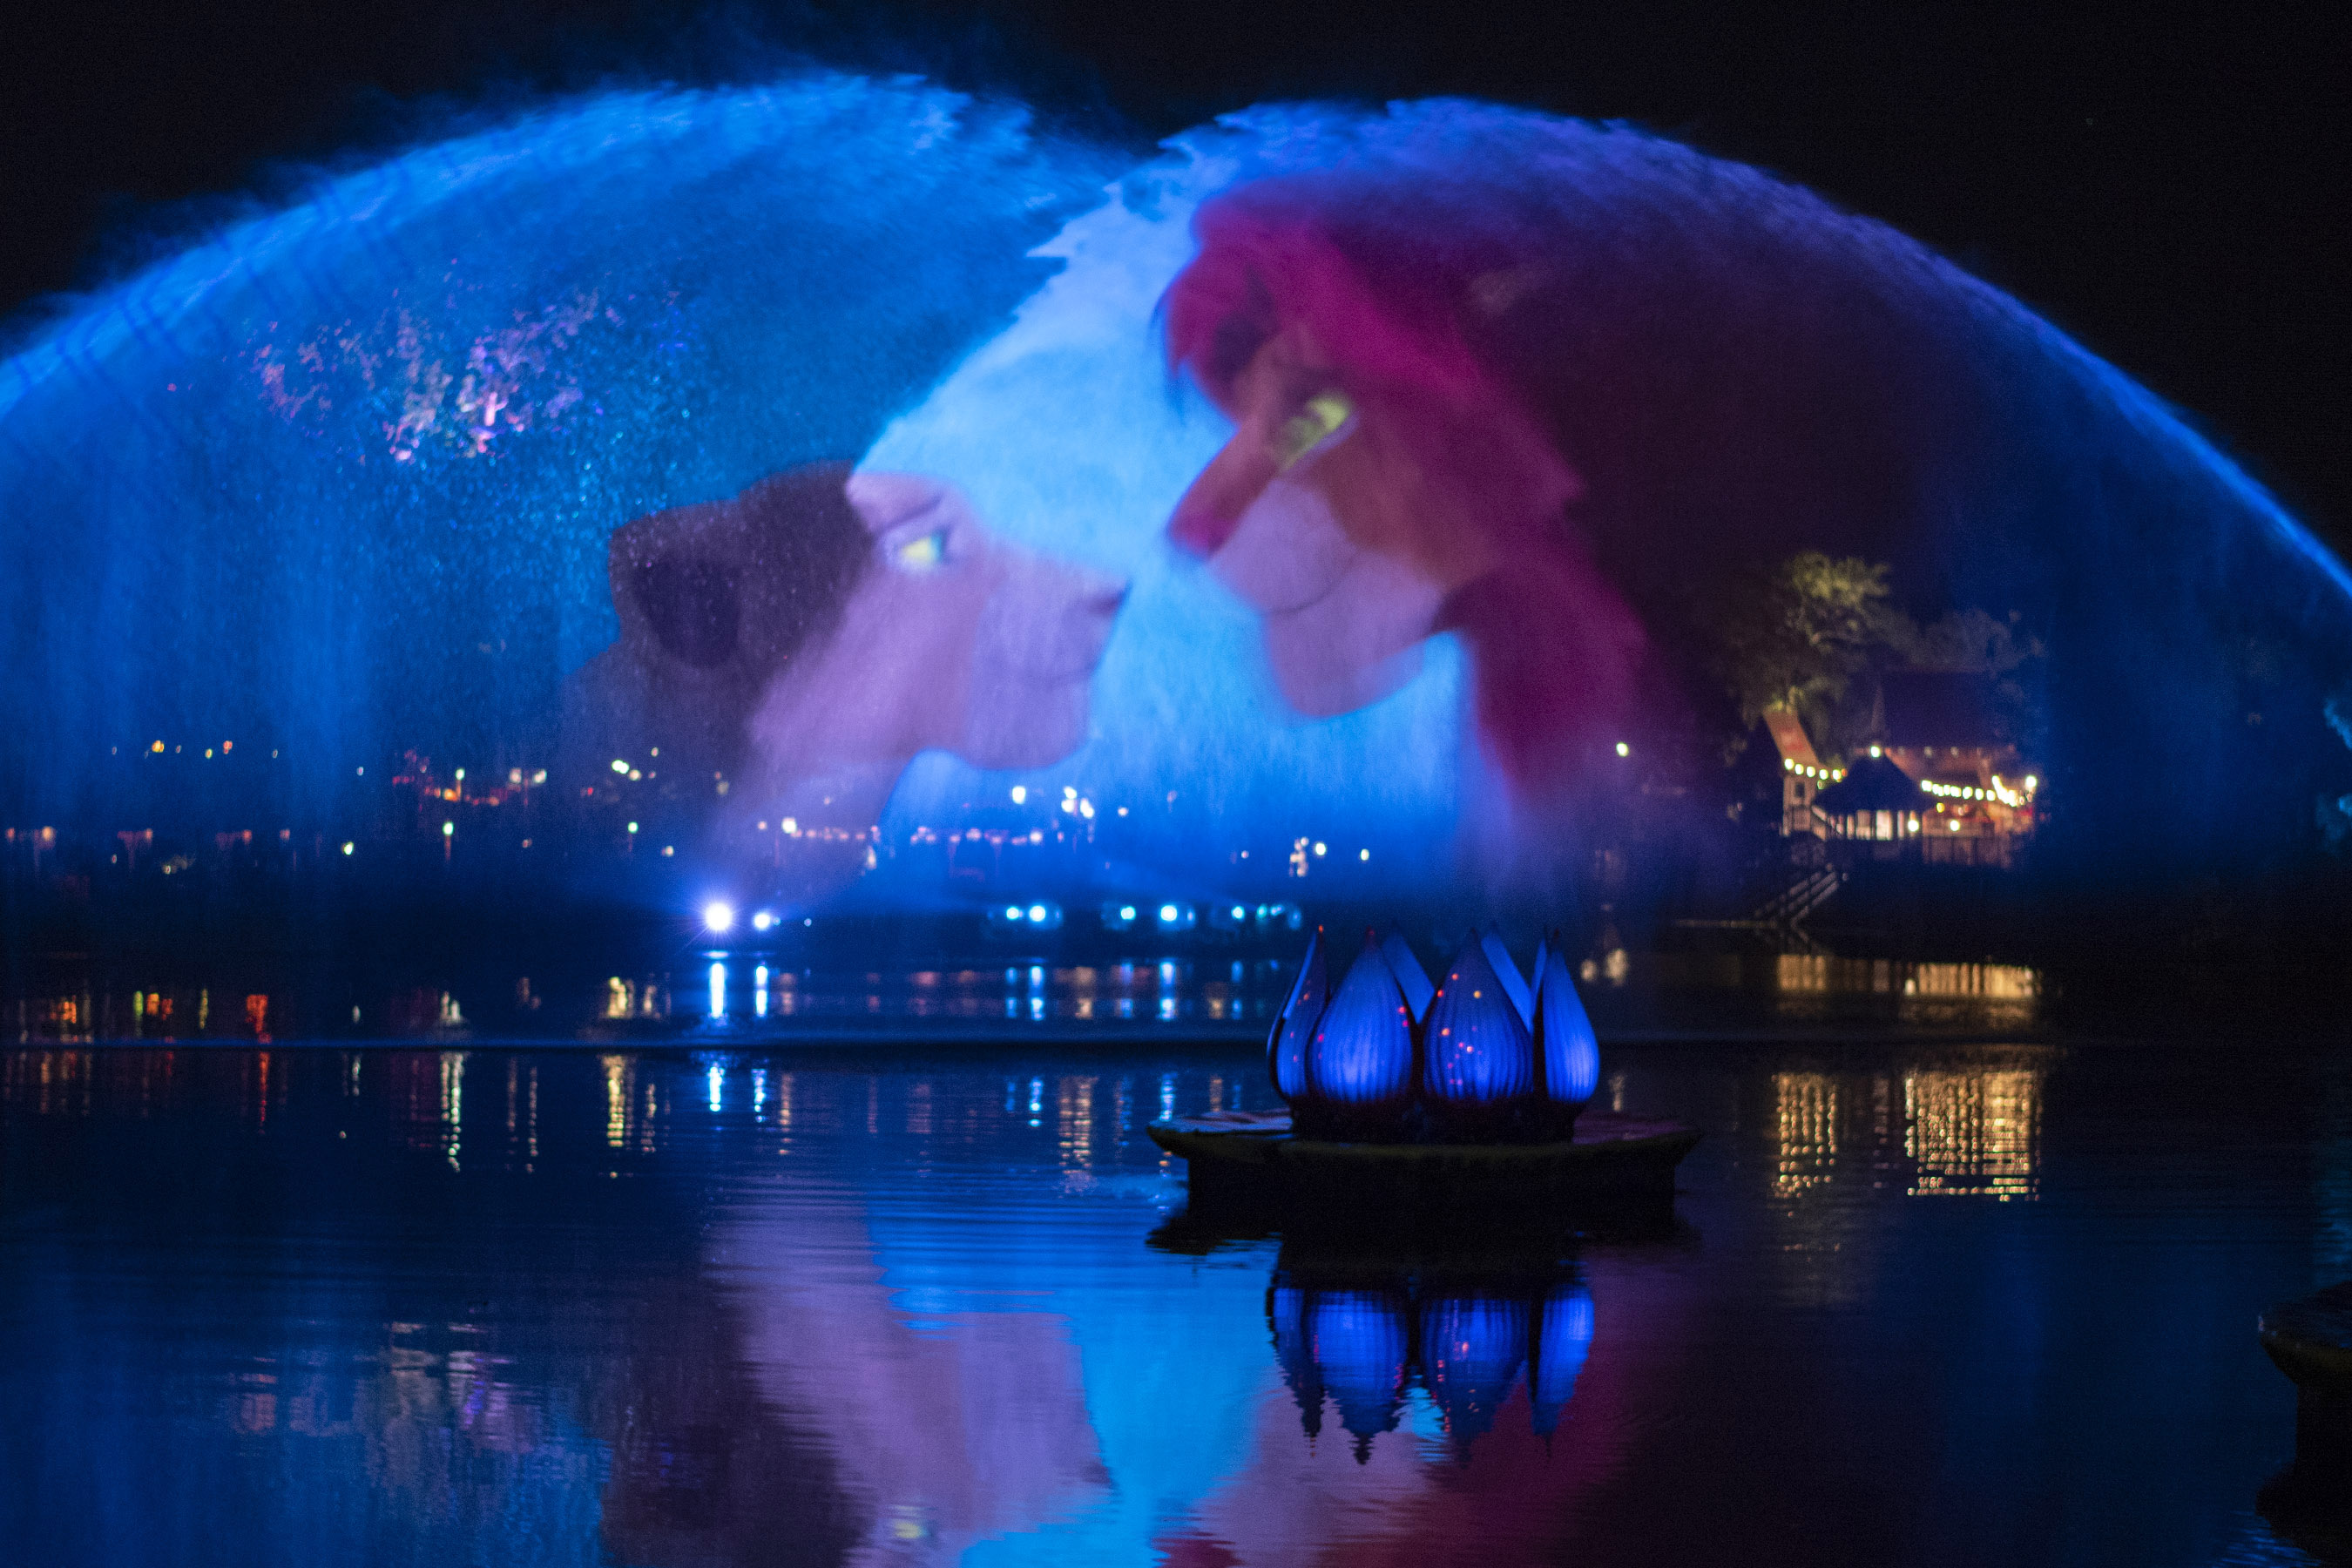 Rivers of Light update debuts tonight - Walt Disney World - TouringPlans Discussion Forums